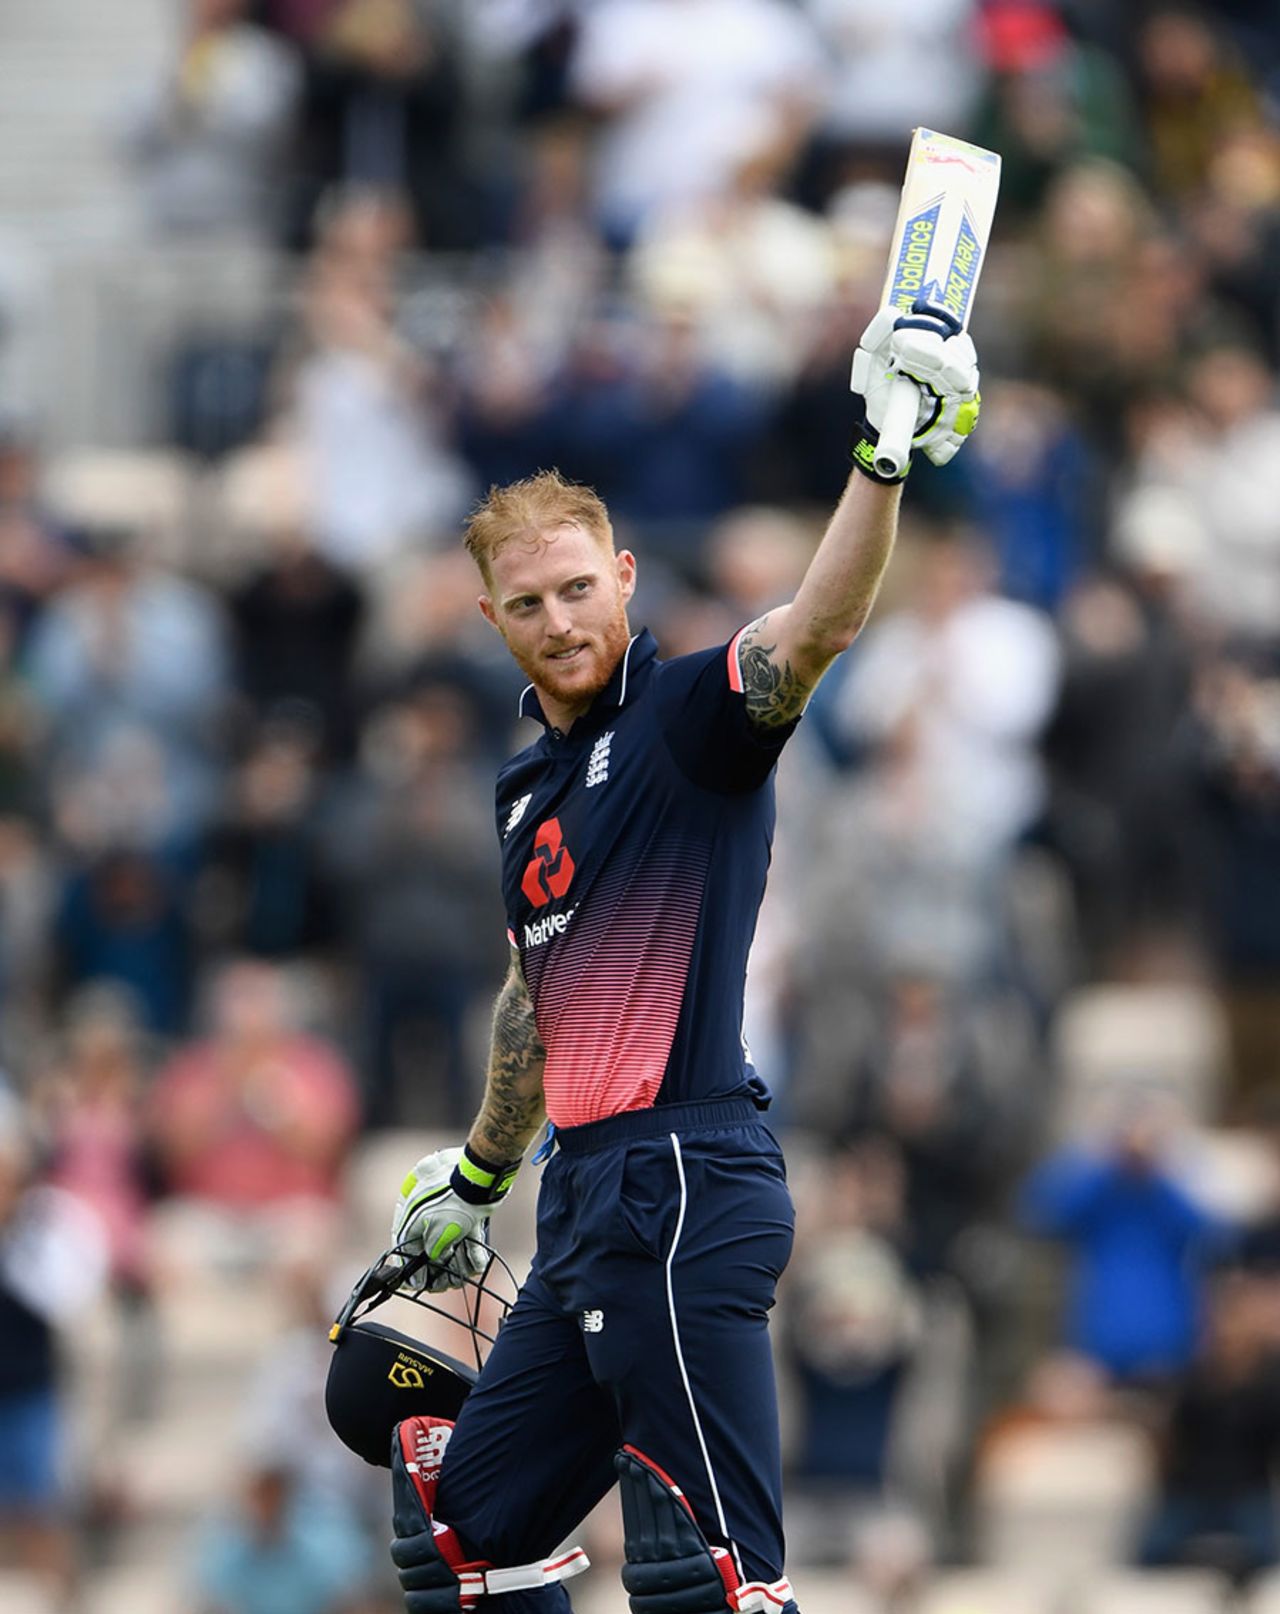 Ben Stokes made his second ODI century off 77 balls, England v South Africa, 2nd ODI, Ageas Bowl, May 27, 2017